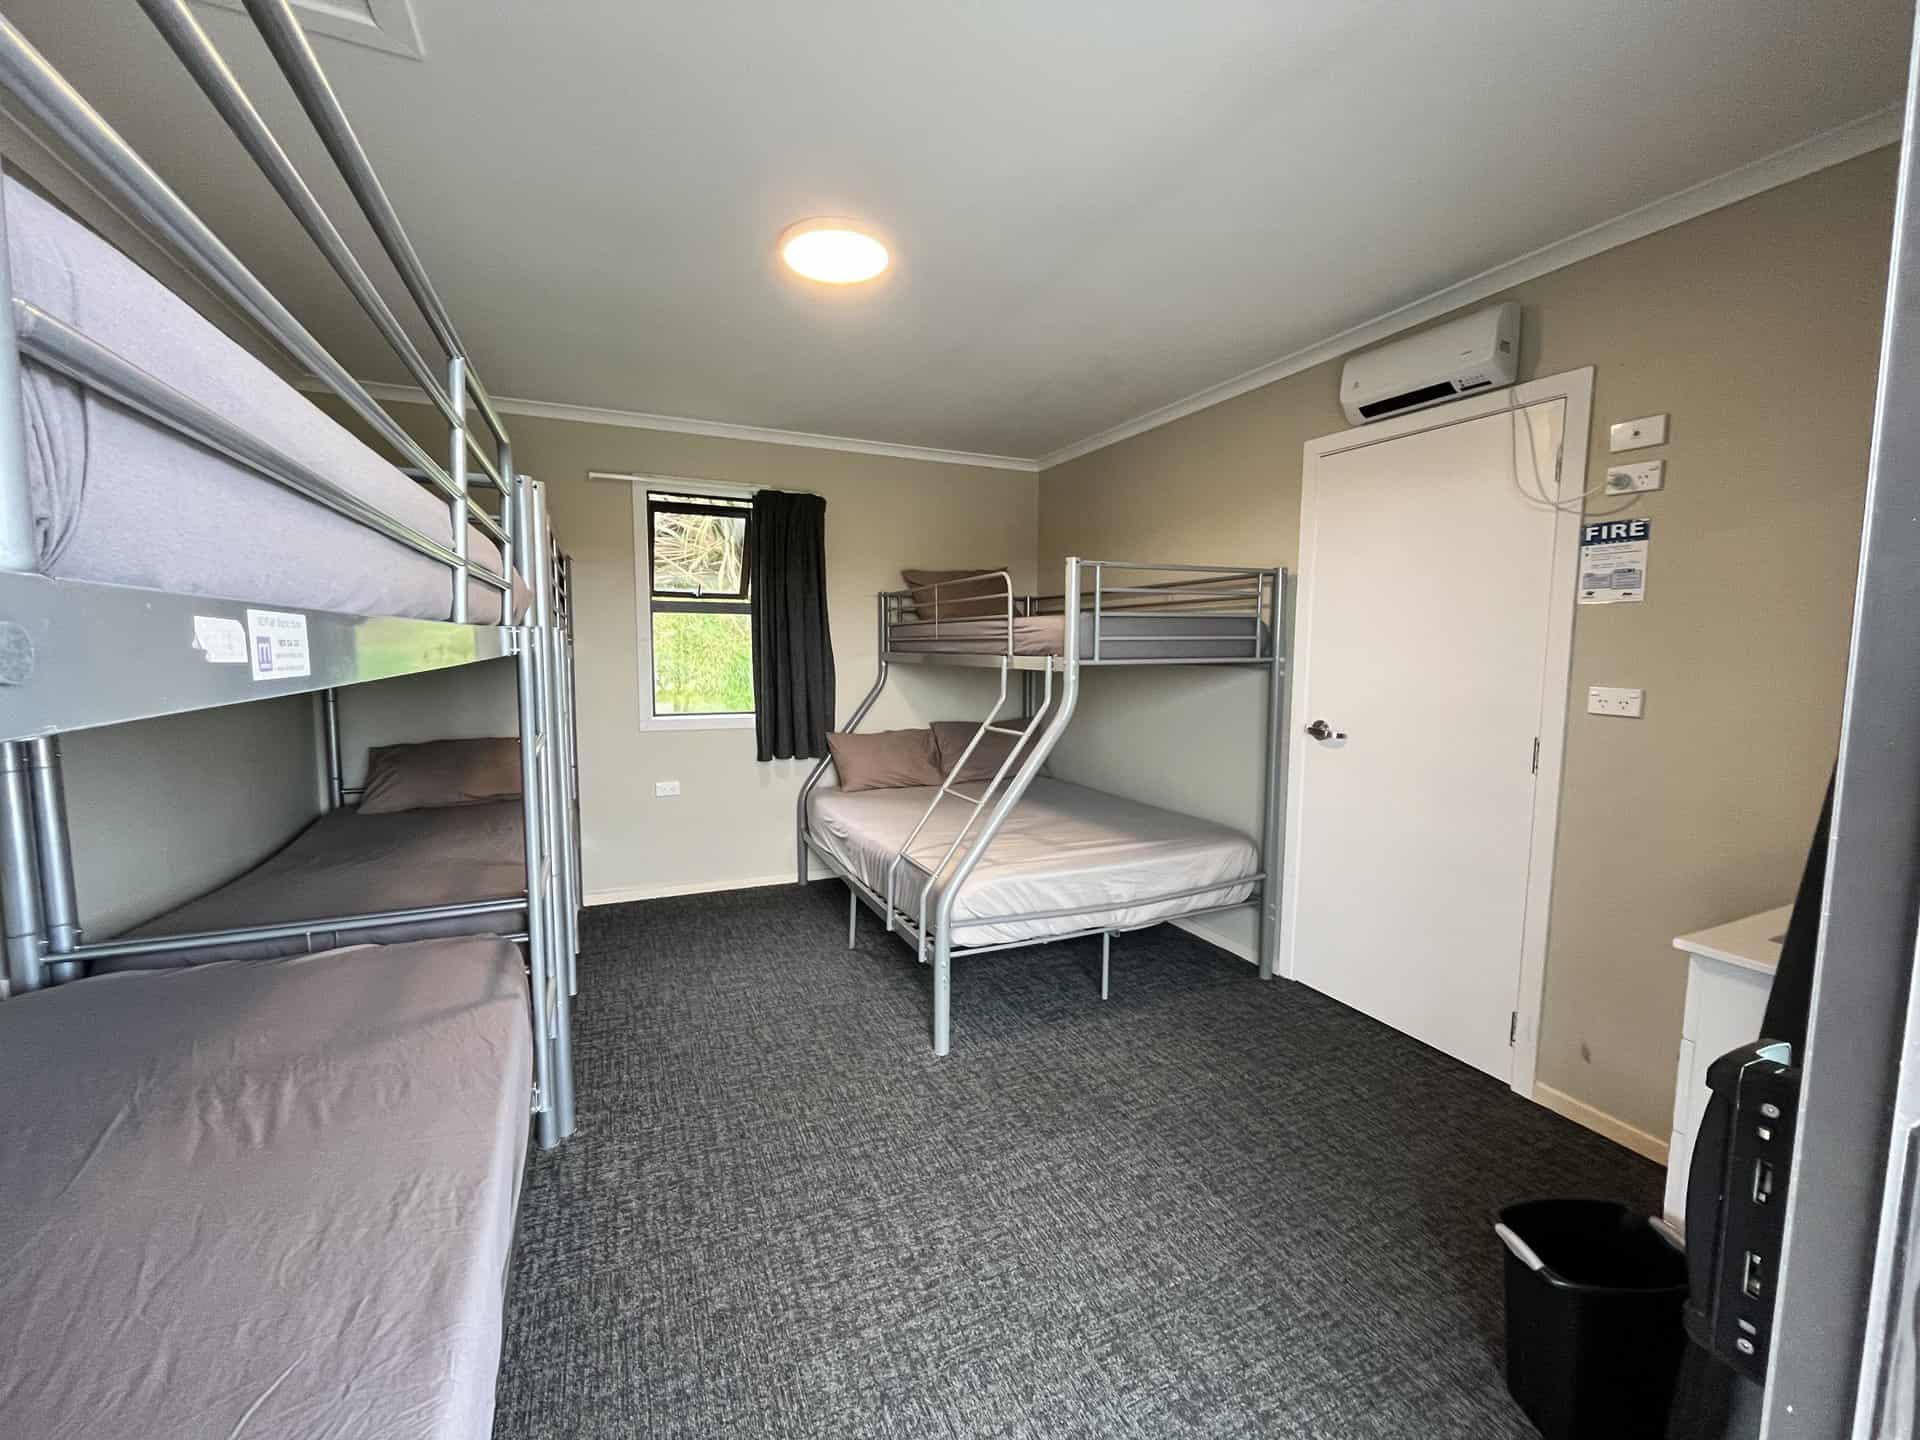 Standard Family Bunk room with queen bed and 5 bunks